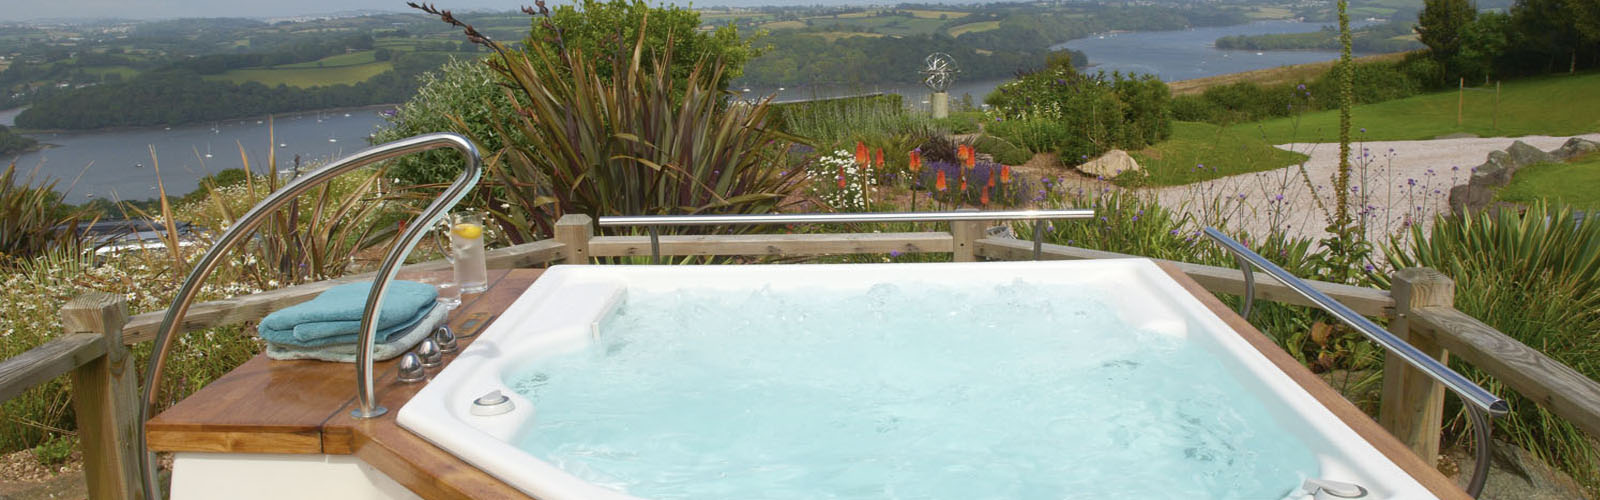 Luxury Holiday Cottages In Devon With A Hot Tub Kate And Tom’s